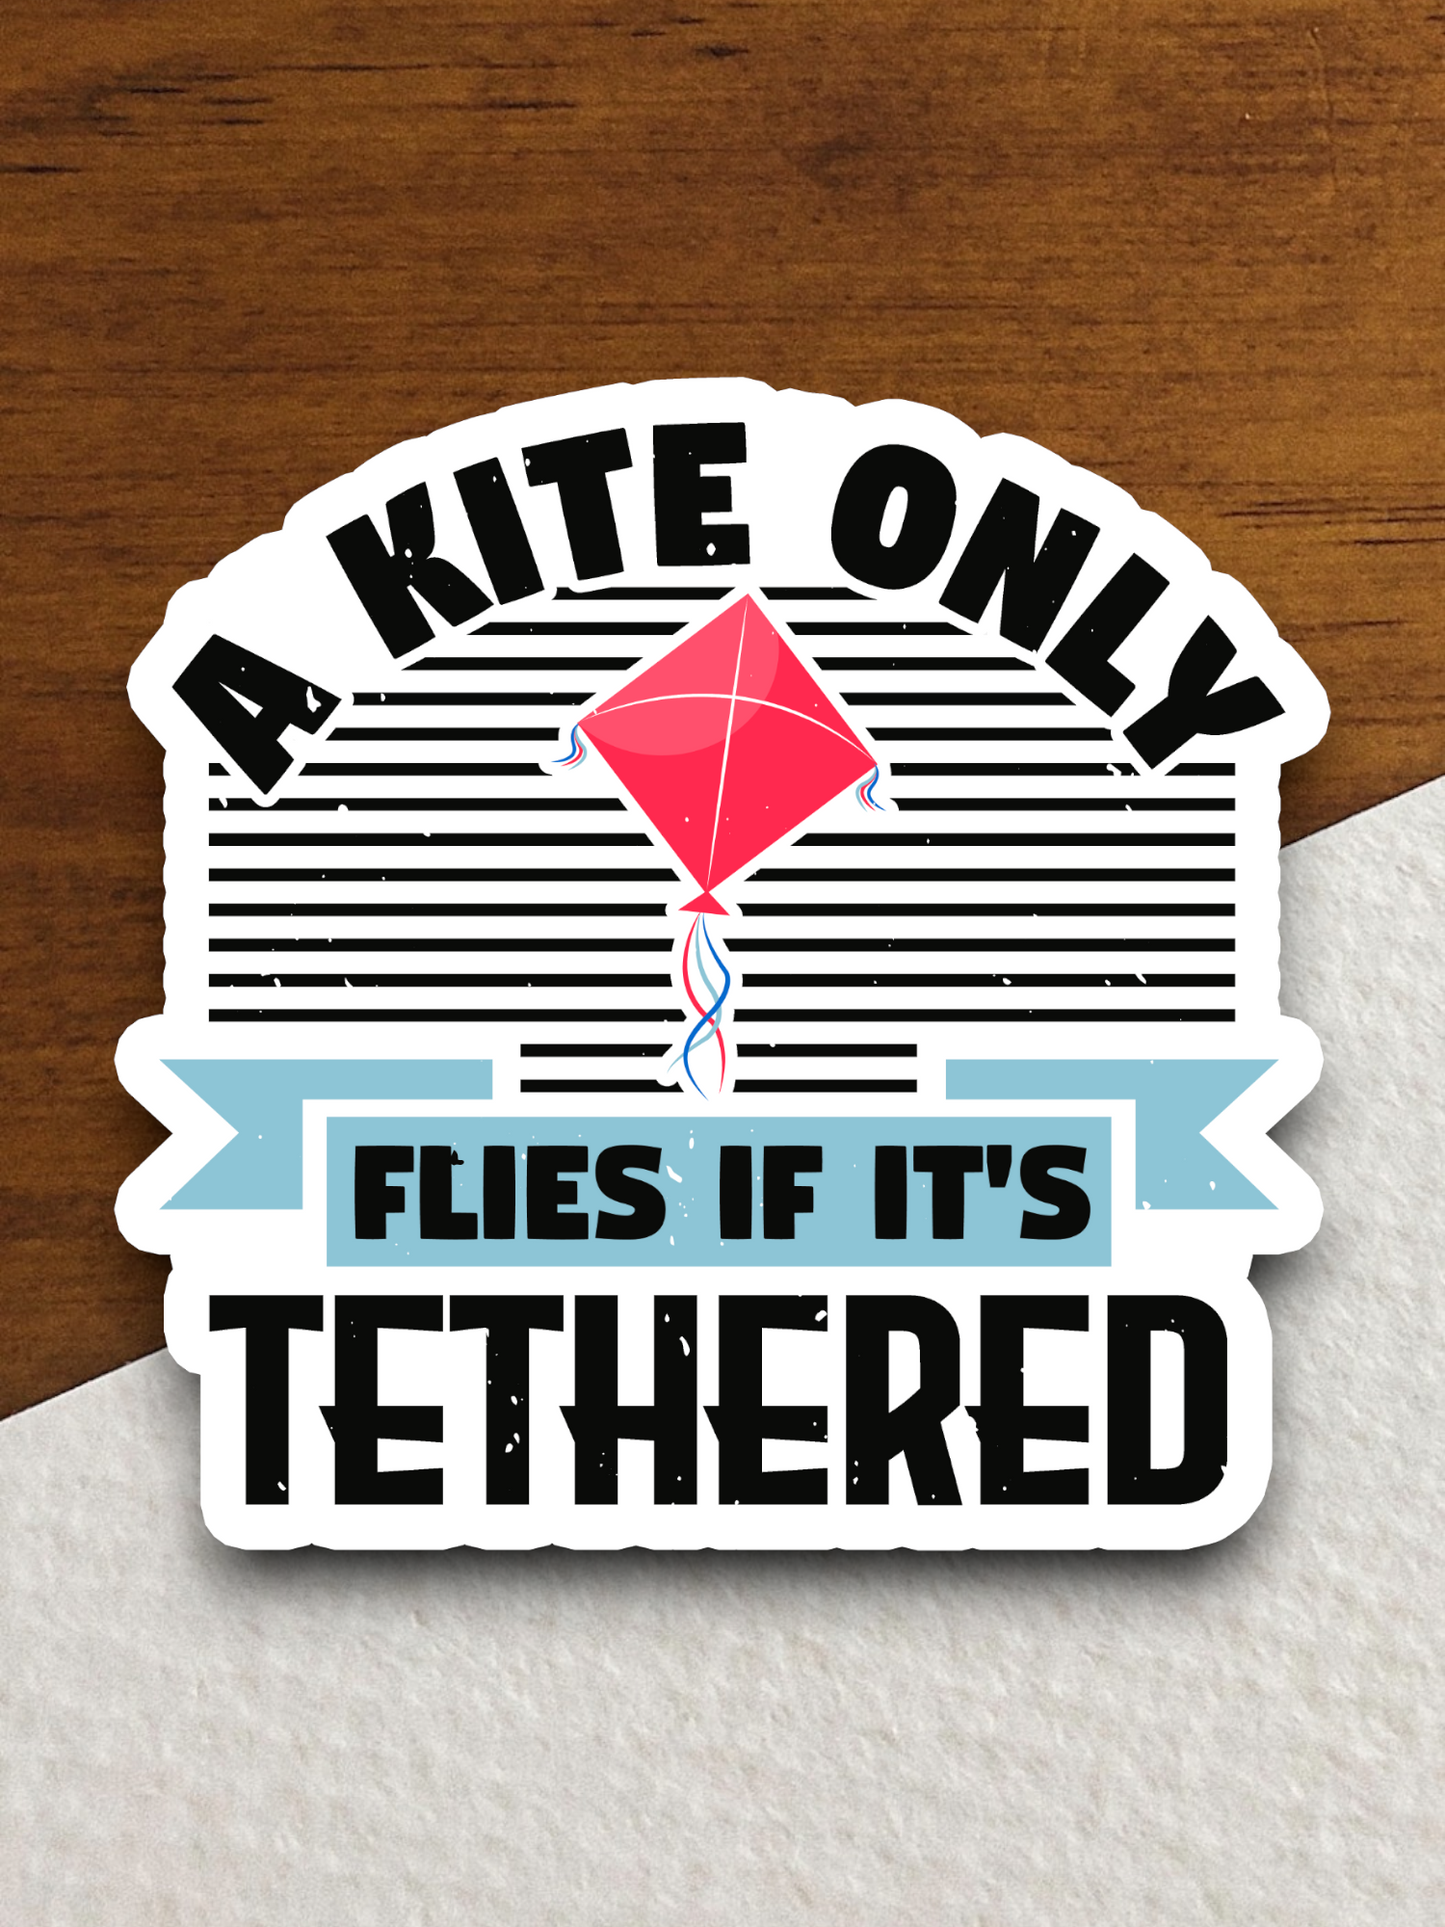 A Kite Only Lies if it's Tethered Sticker